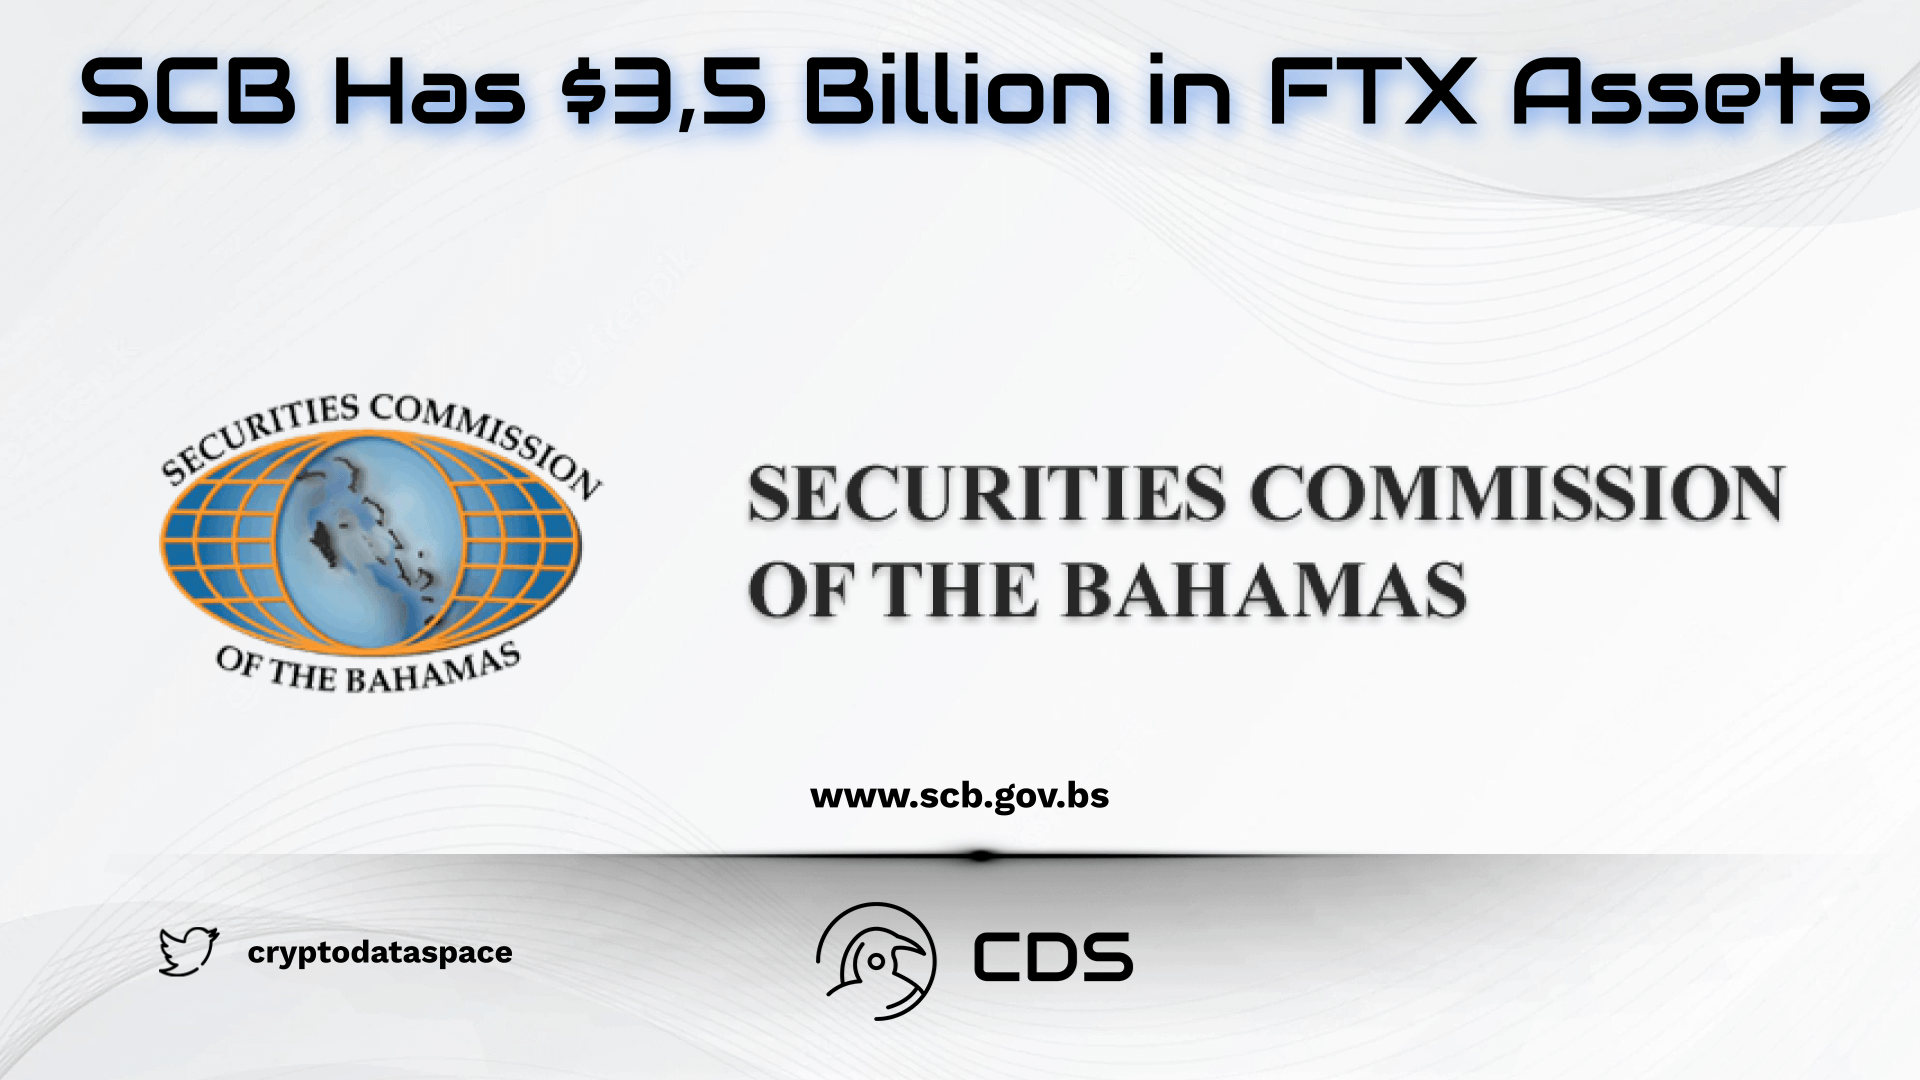 The Bahamas Securities Commission Confirmed That It Has $3,5 Billion in FTX Assets